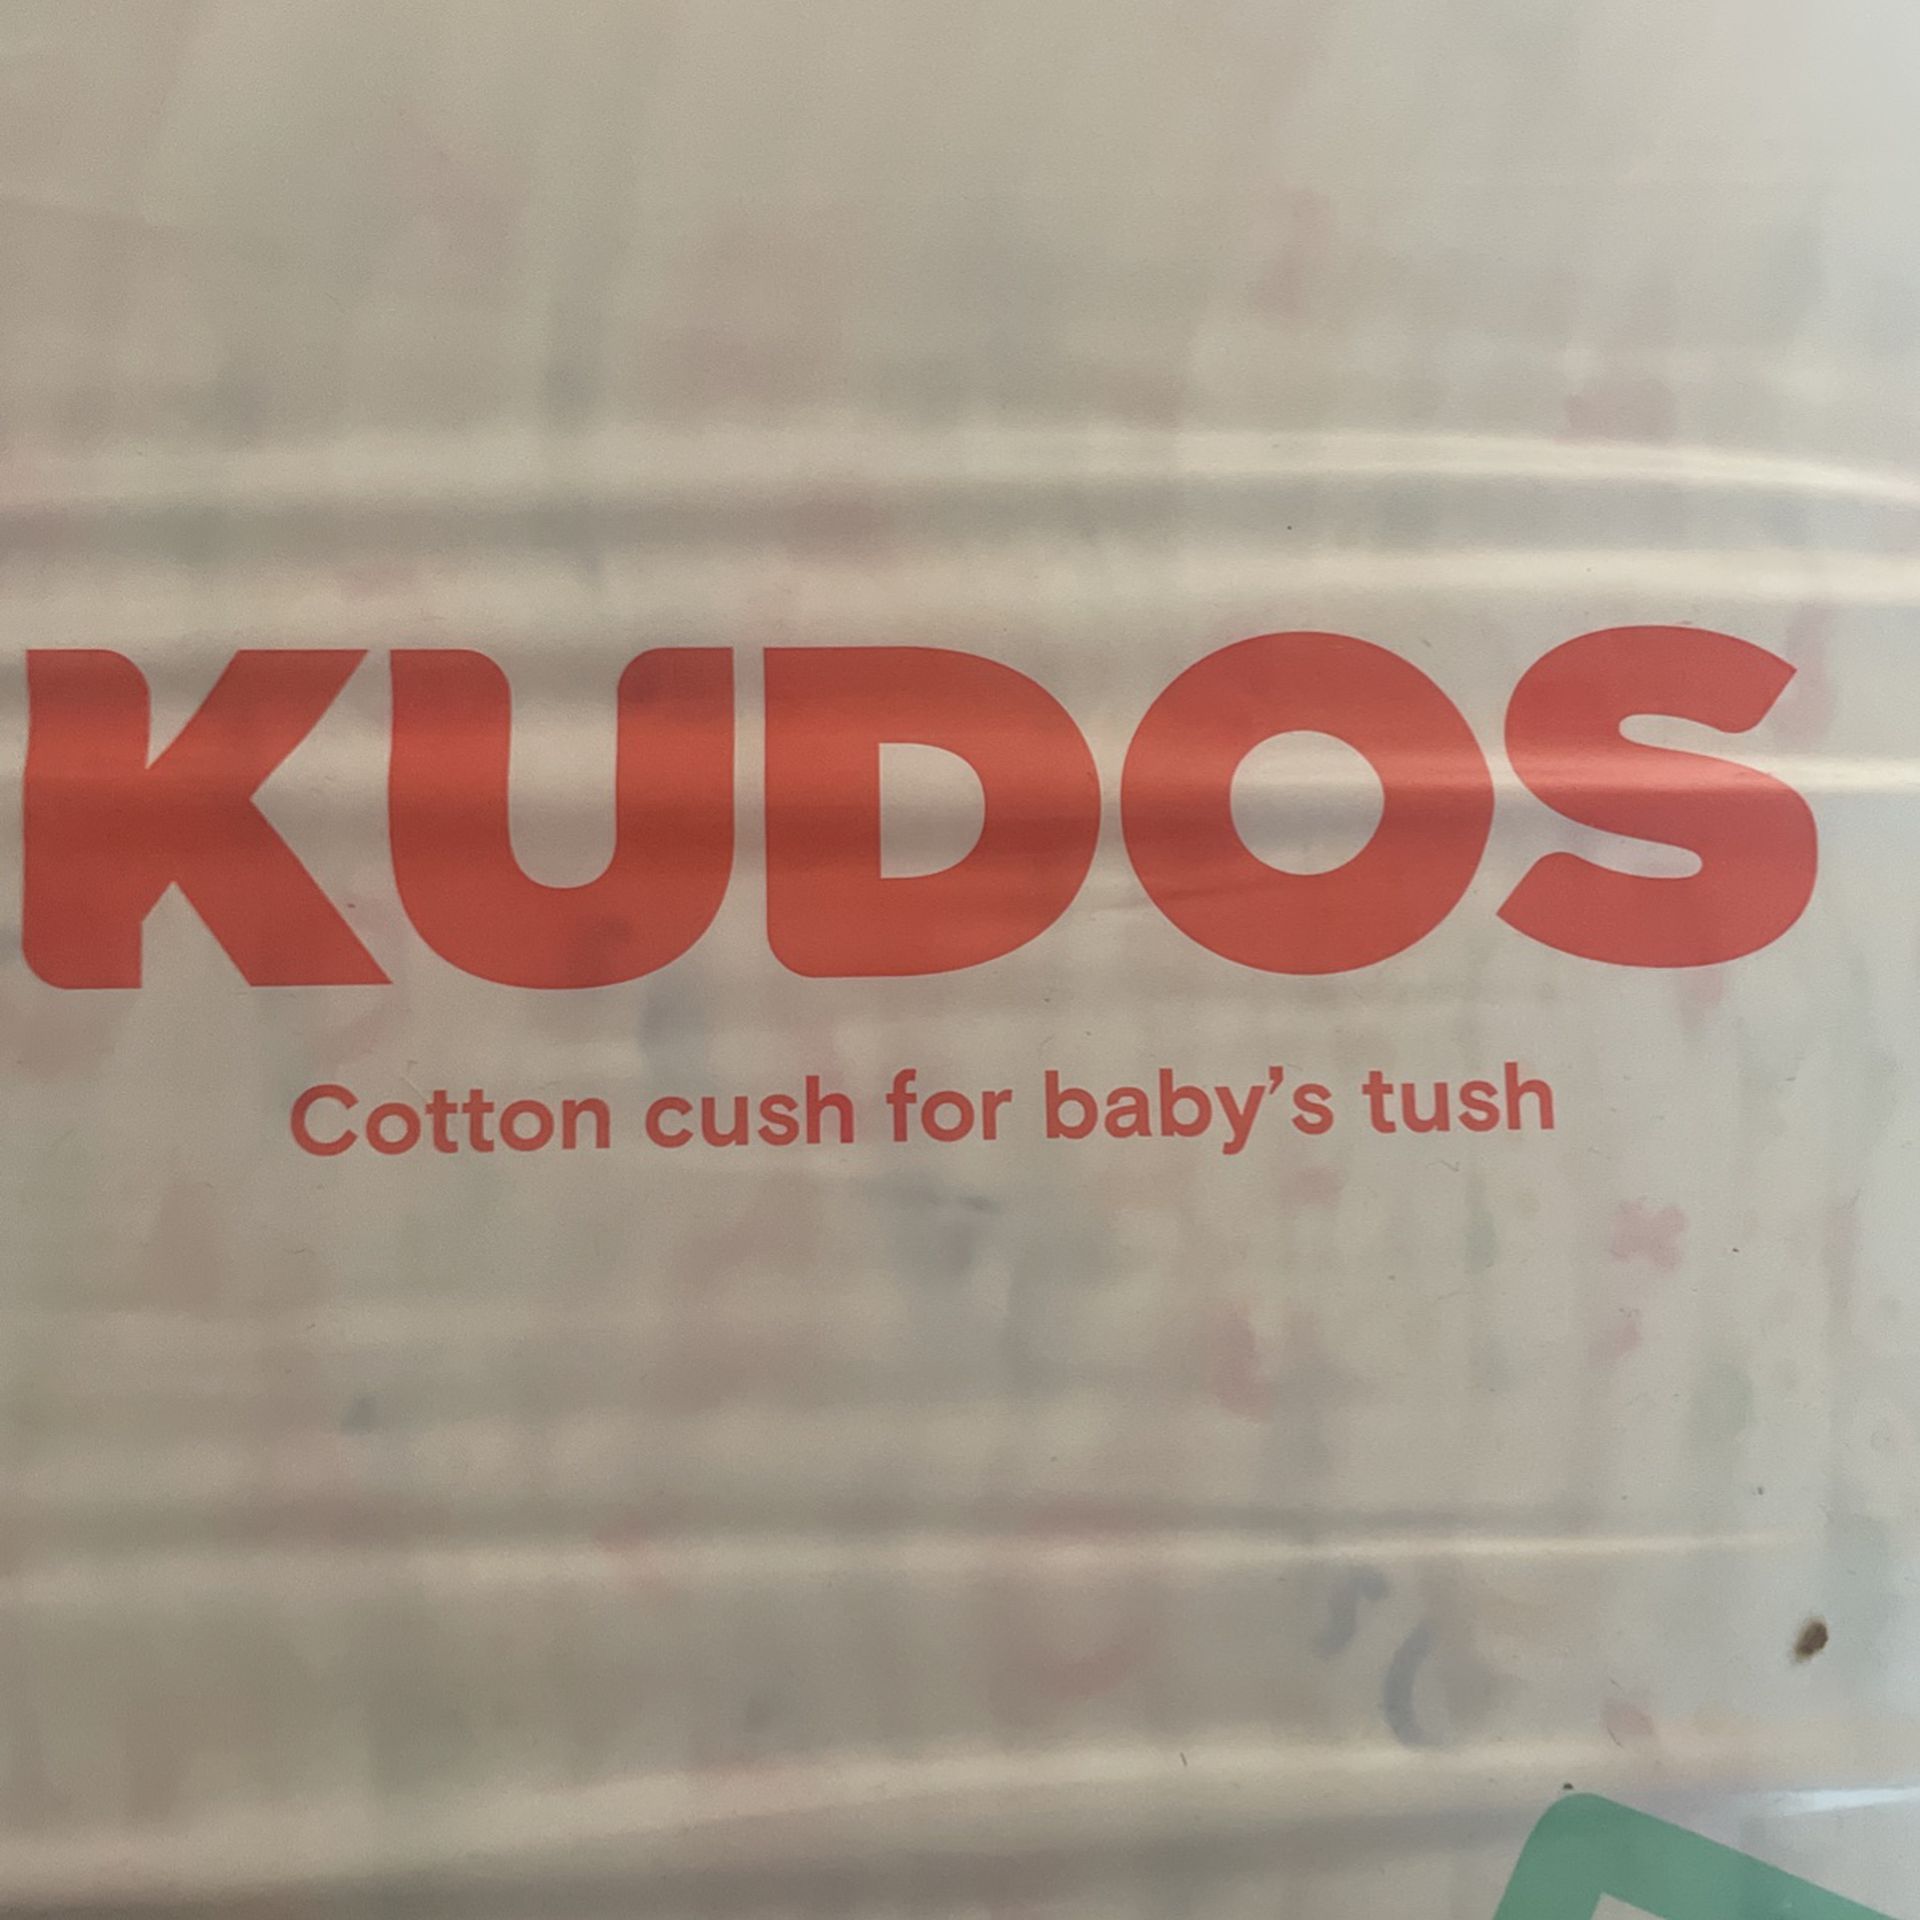 6 Packs Of Kudos Diapers Size 4 